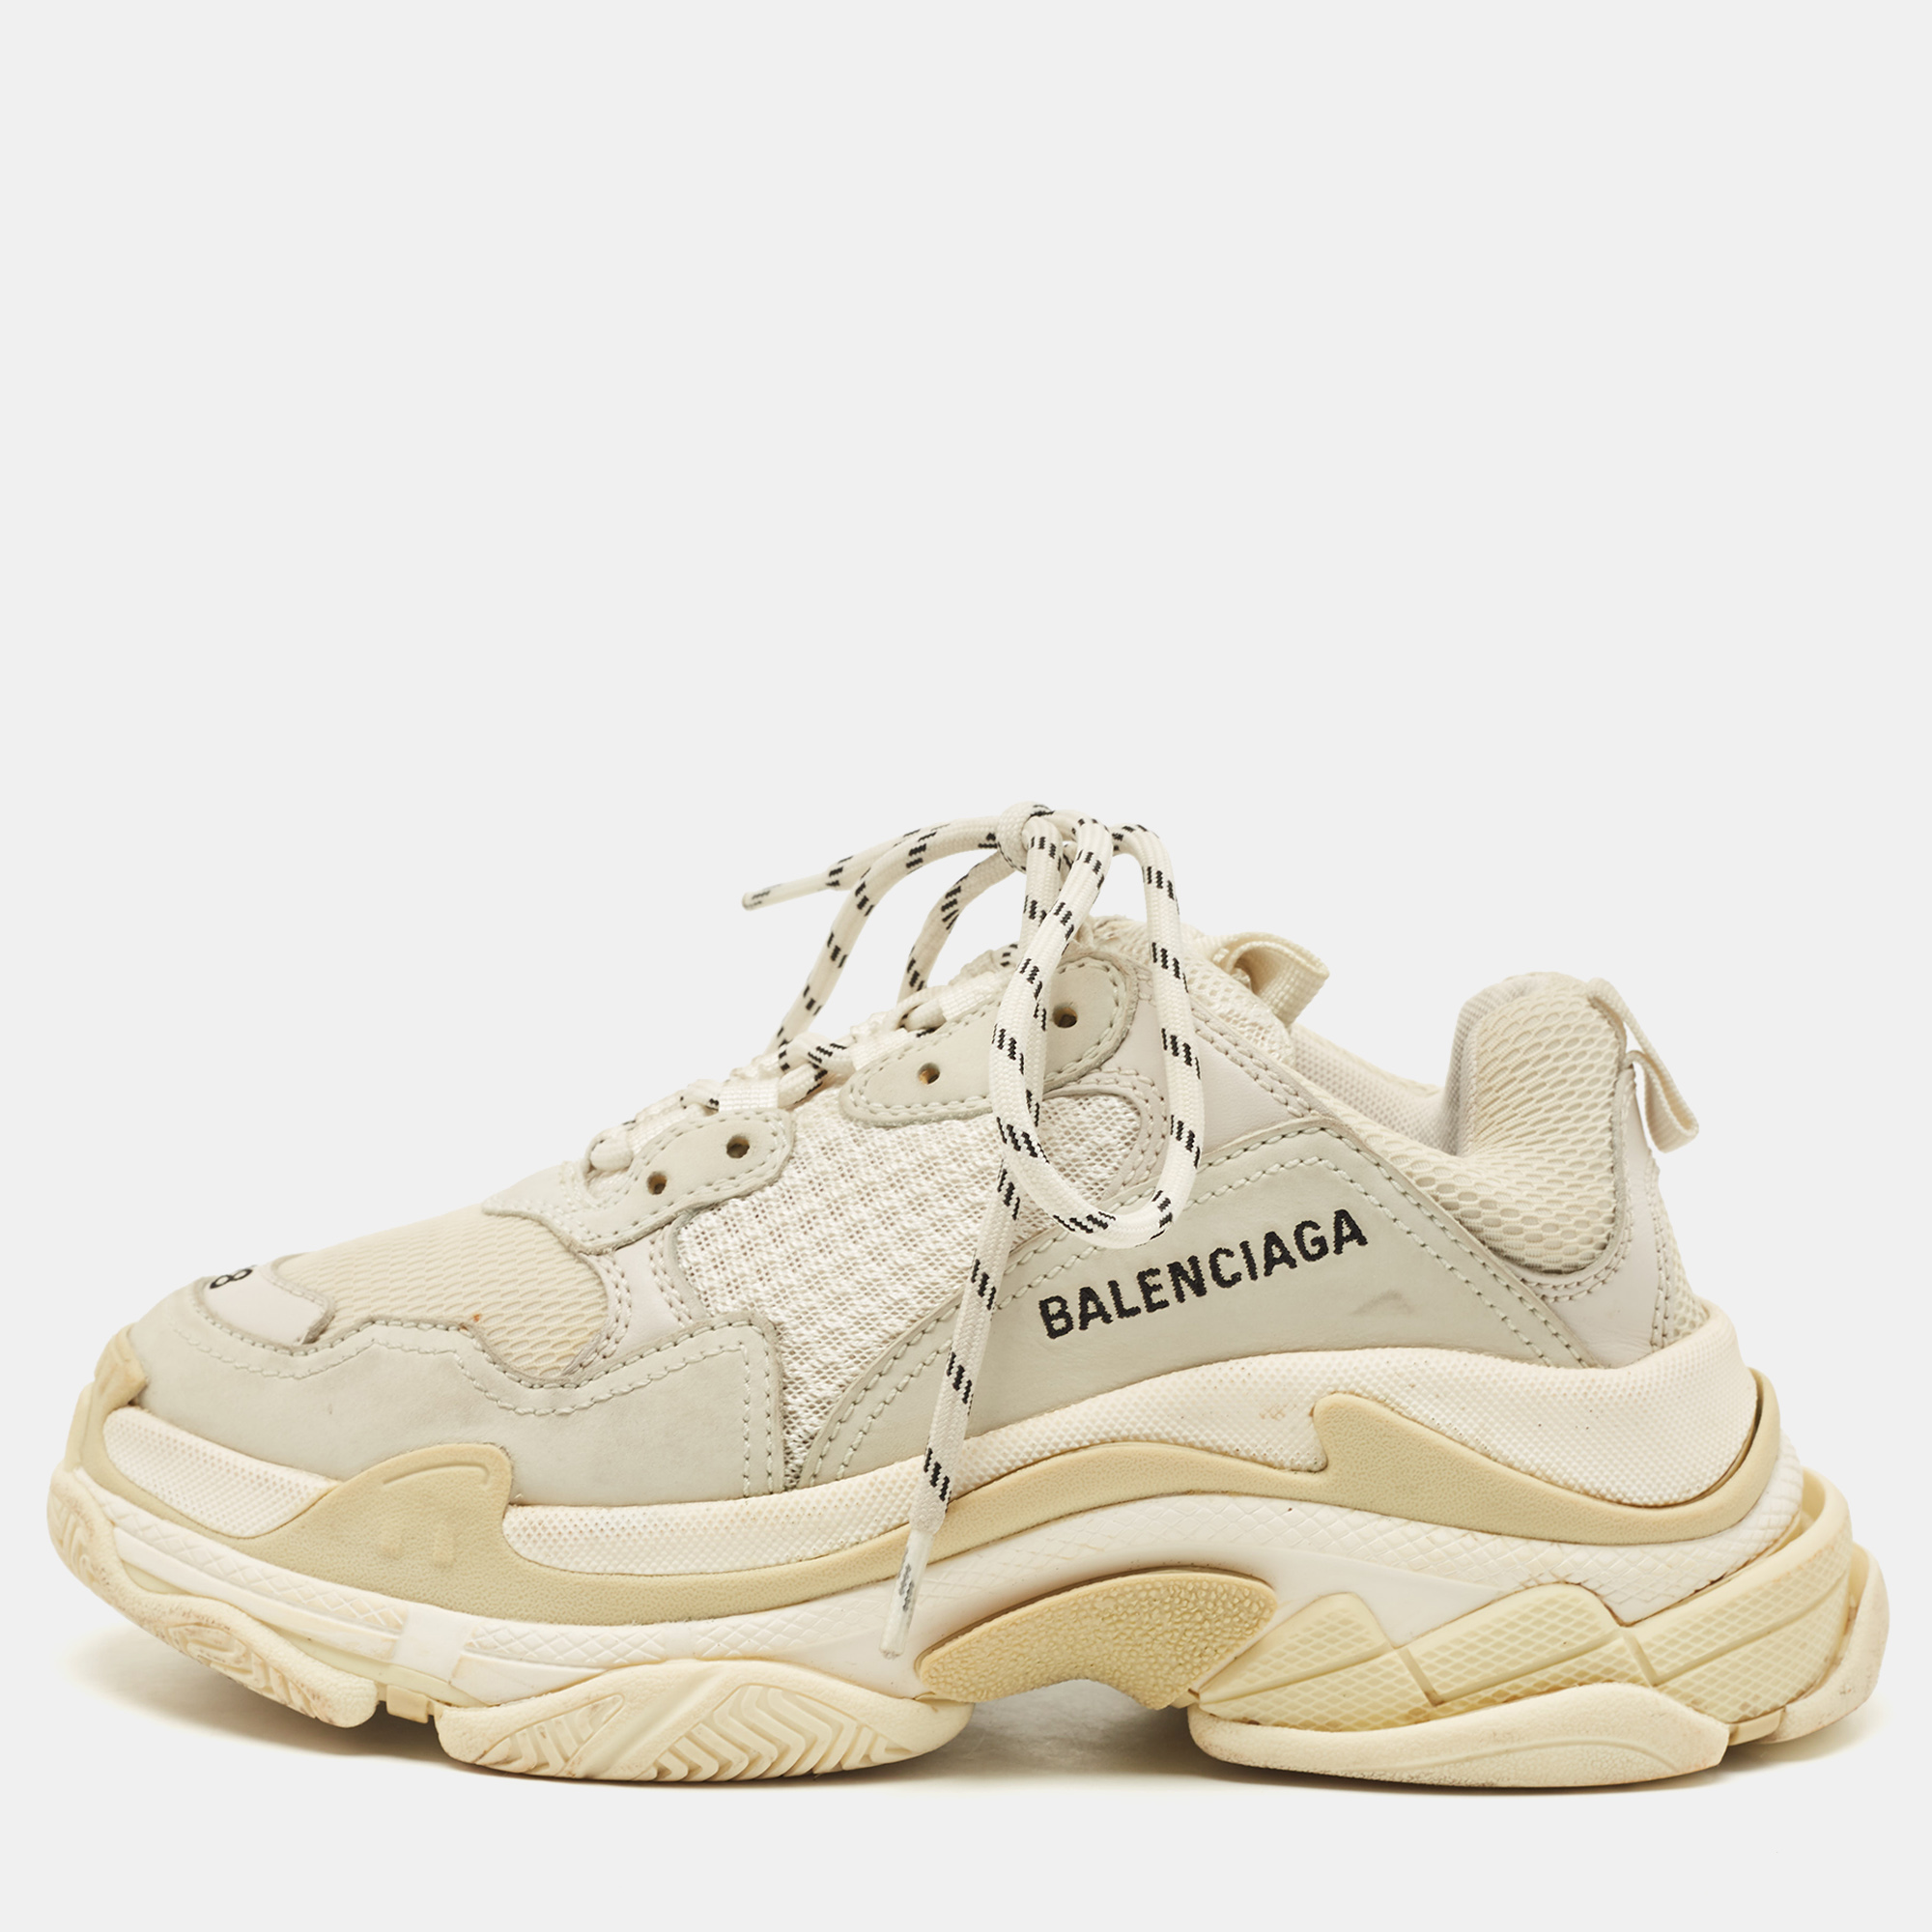 

Balenciaga White/Grey Mesh and Leather Triple S Sneakers Size